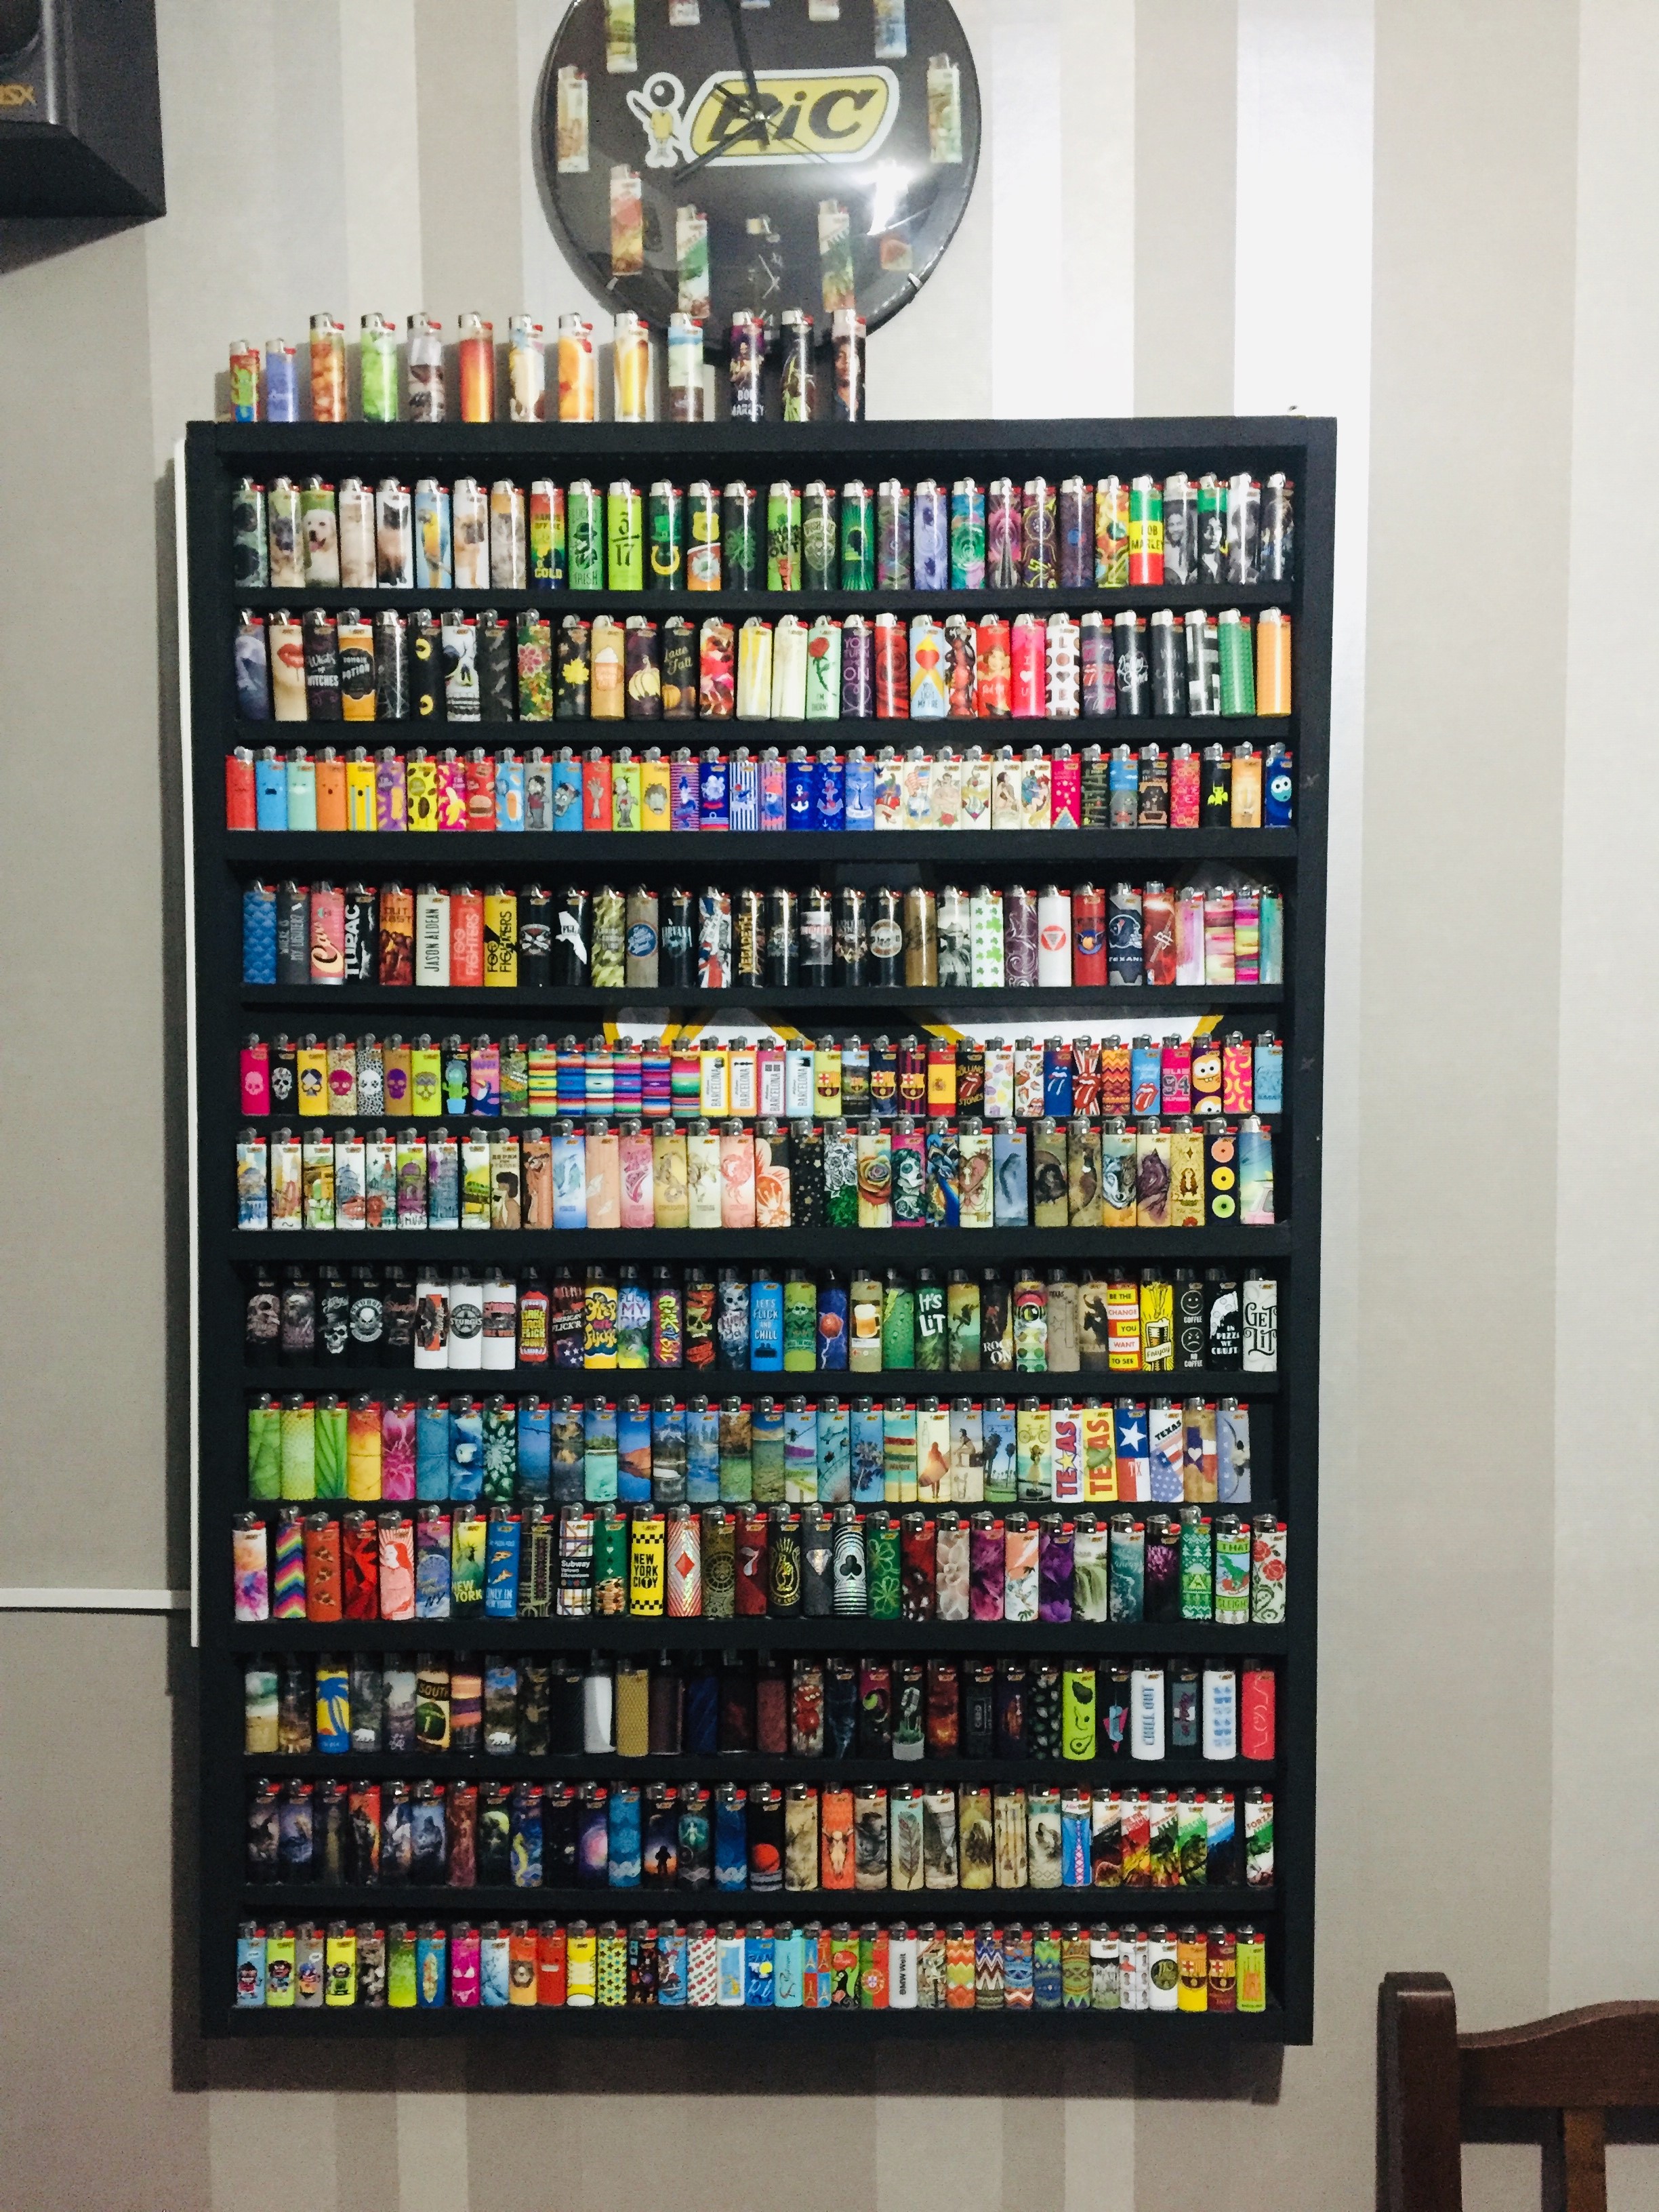 blik opretholde akavet BIC on Twitter: "Is this the largest personal collection of #BIClighters in  the world? Federico de Sousa, a resident of Argentina, began his collection  15 years ago and now owns more than